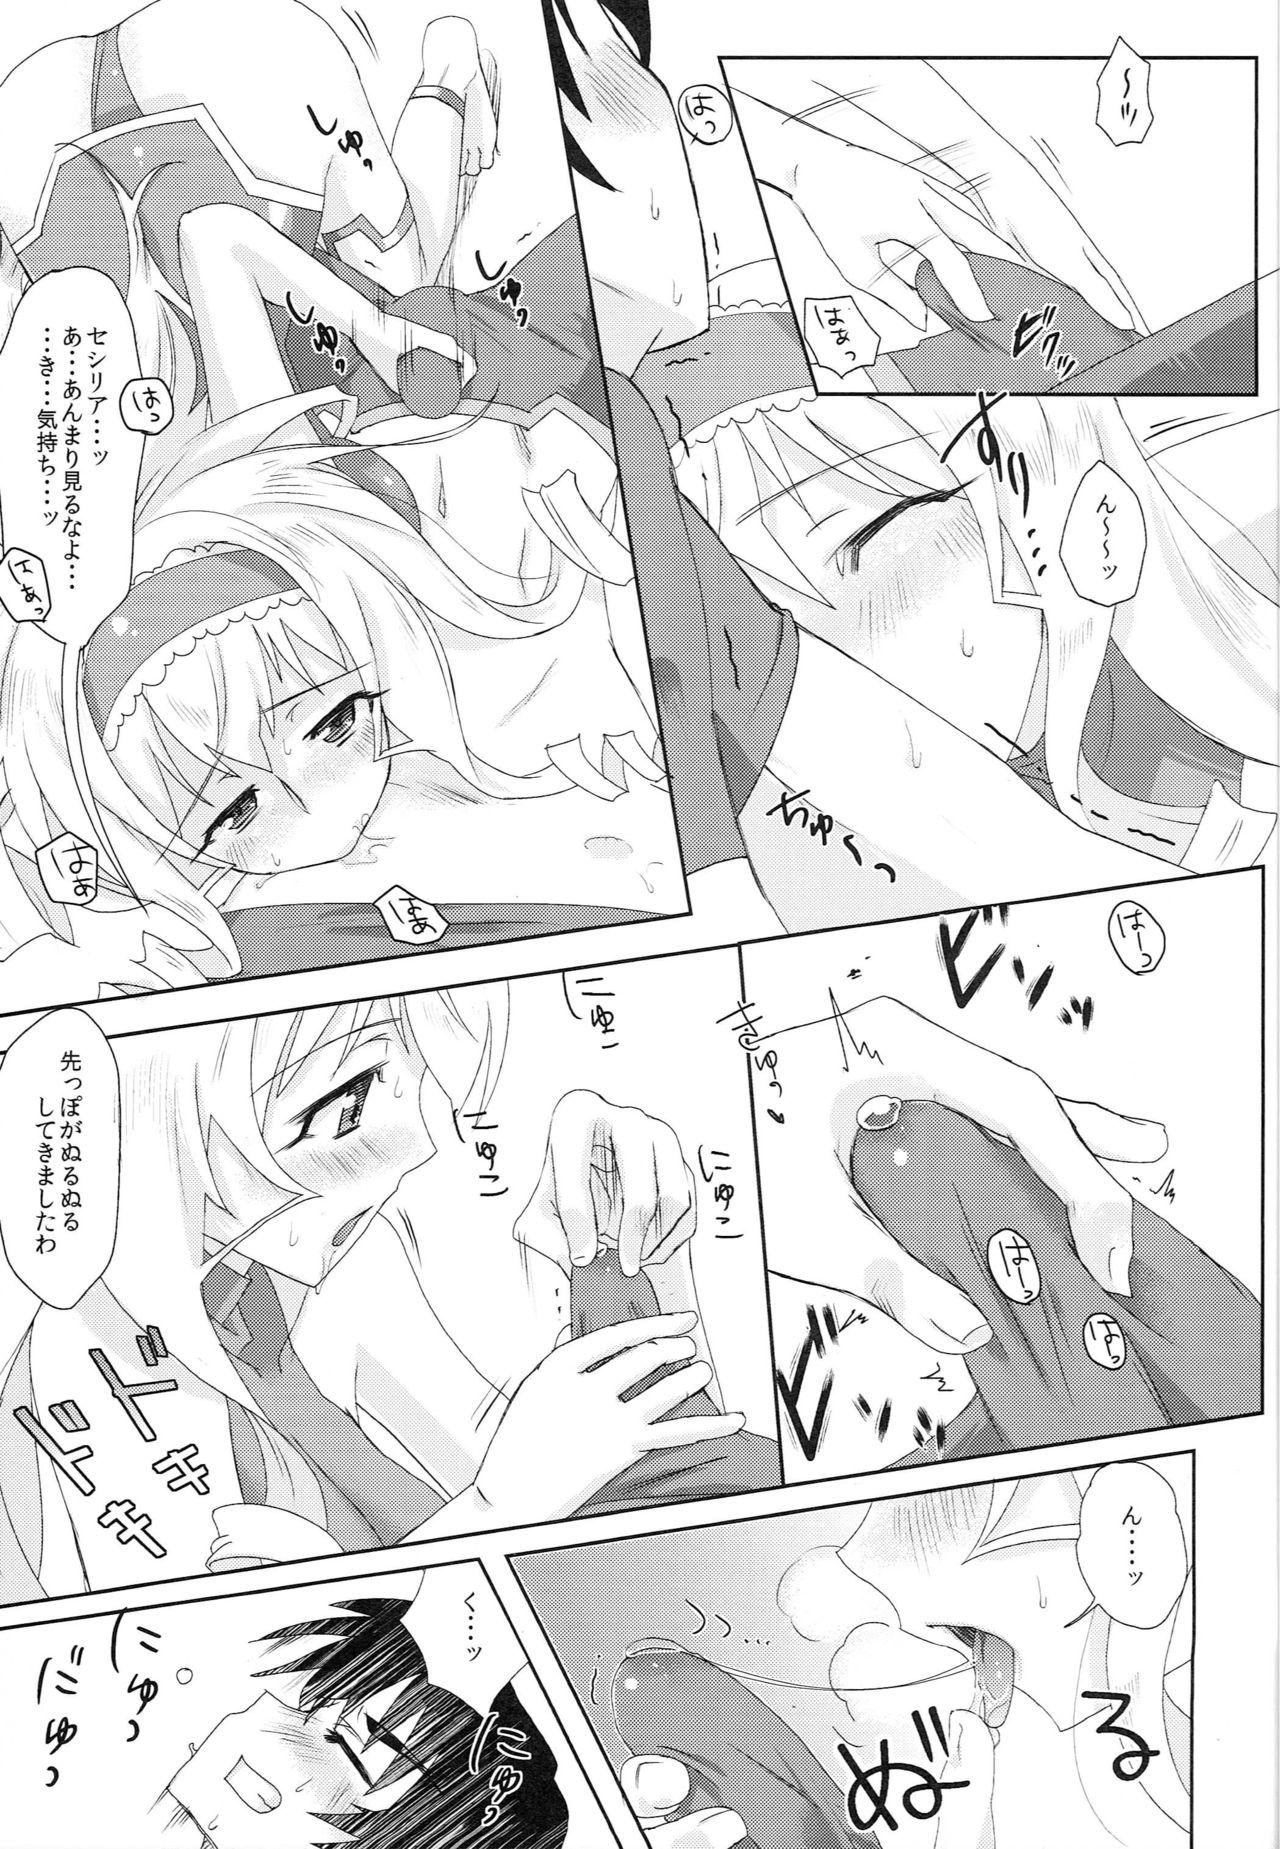 Young Men locker room - Infinite stratos Russian - Page 10